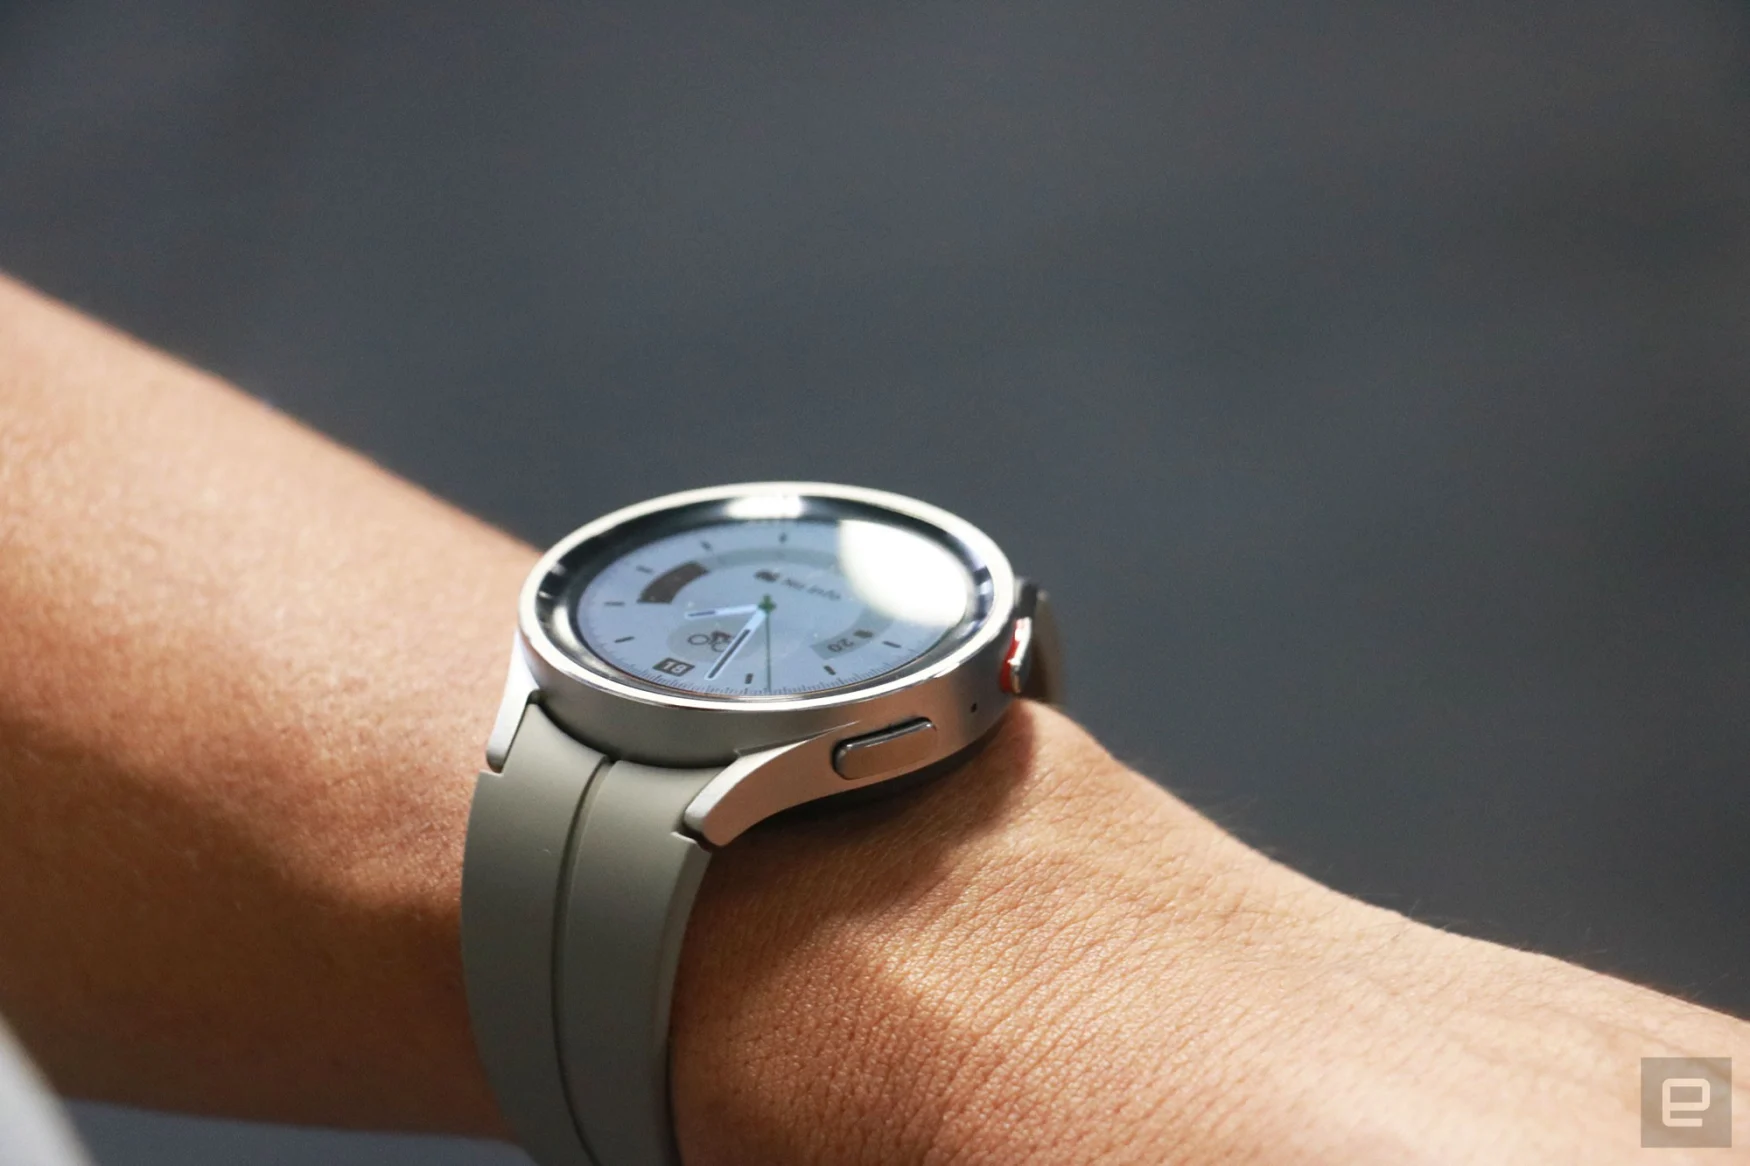 The Samsung Galaxy Watch 5 Pro on a wrist, with some lights reflecting off its screen.